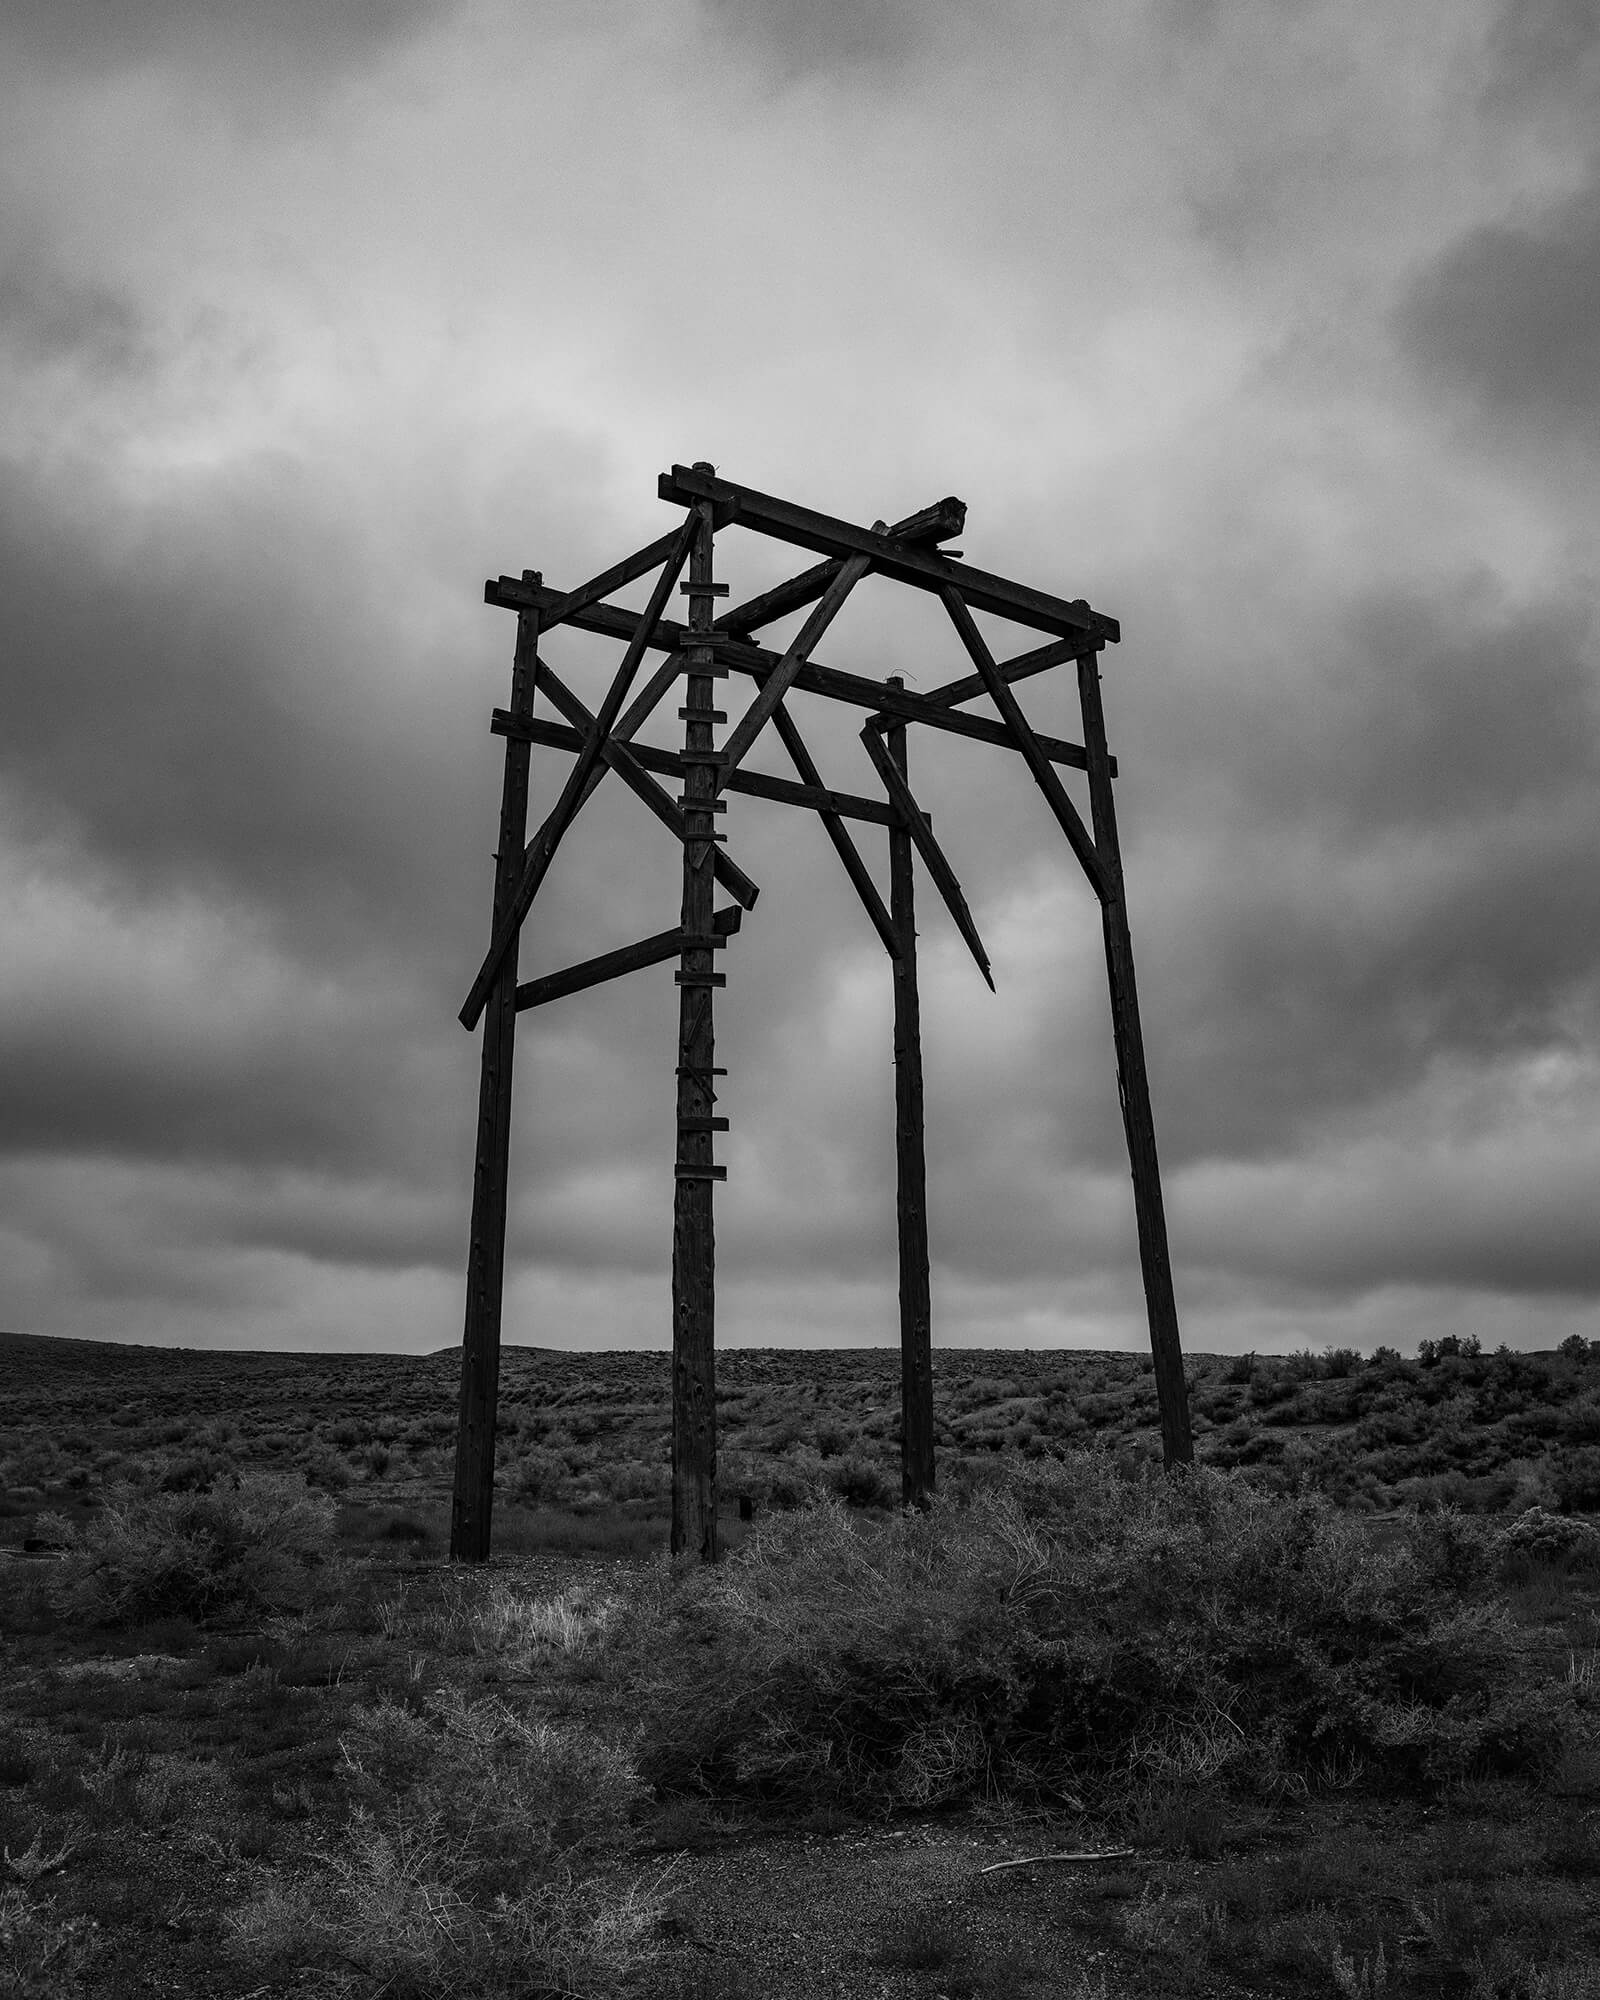 the black skeleton of an abandoned oil derrick in an empty field on a cloudy day